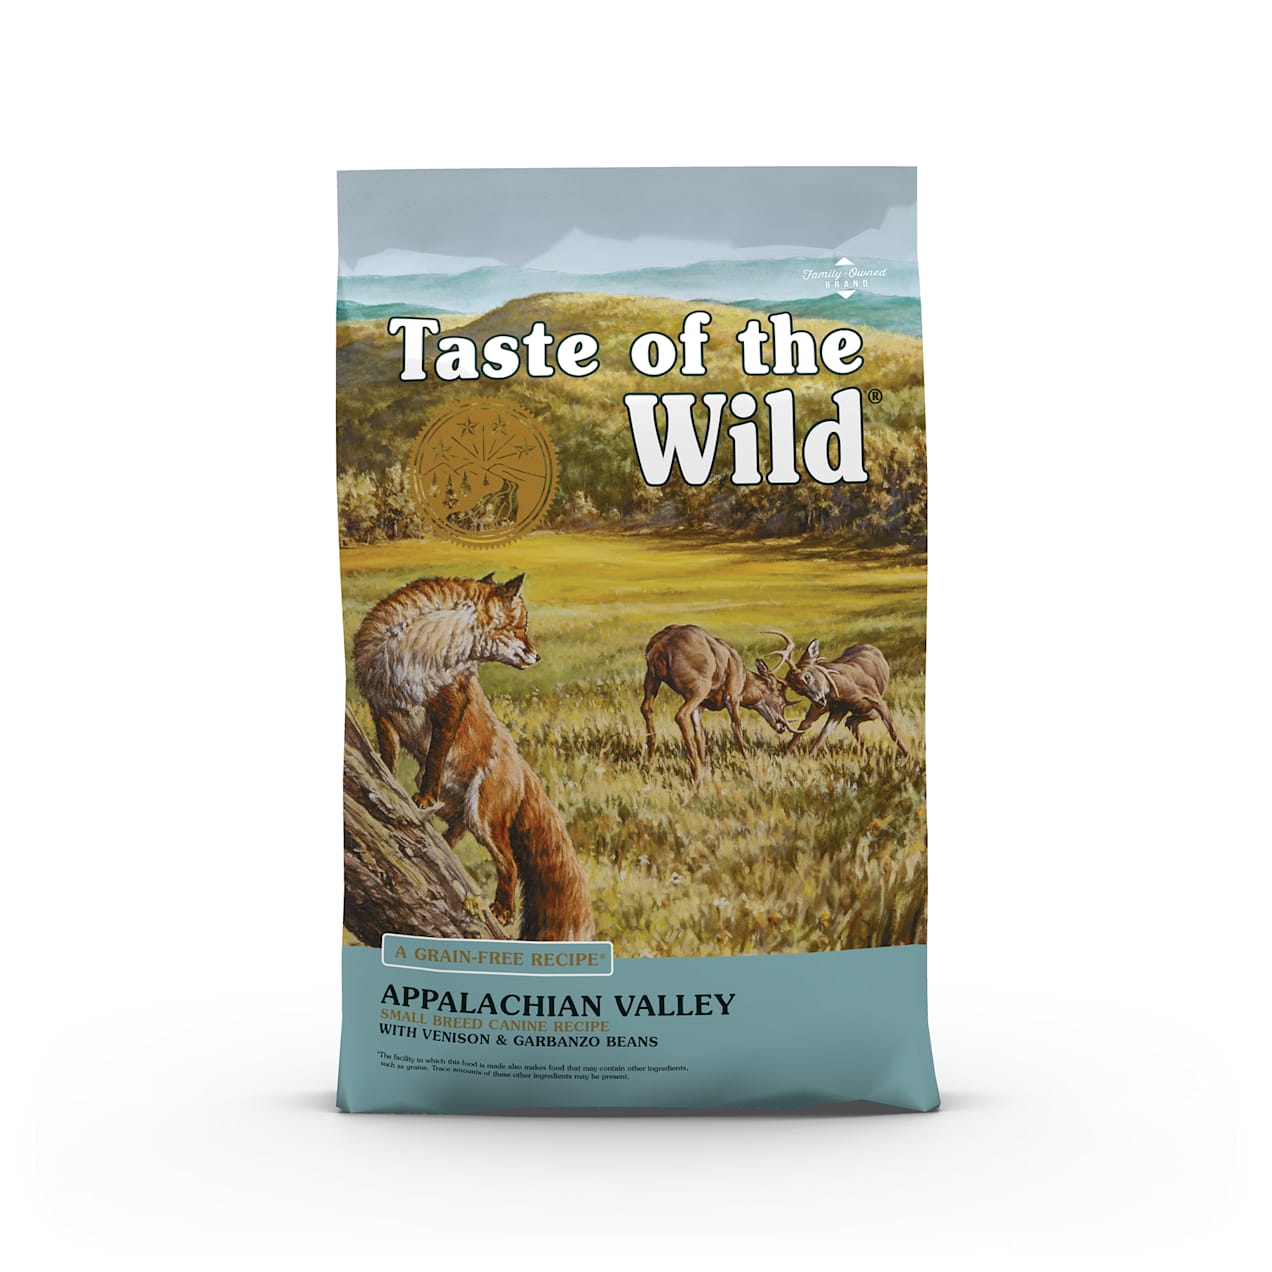 Taste of the Wild Appalachian Valley Small Breed Grain-Free Roasted Venison Dry Dog Food, 28  lbs. | Petco